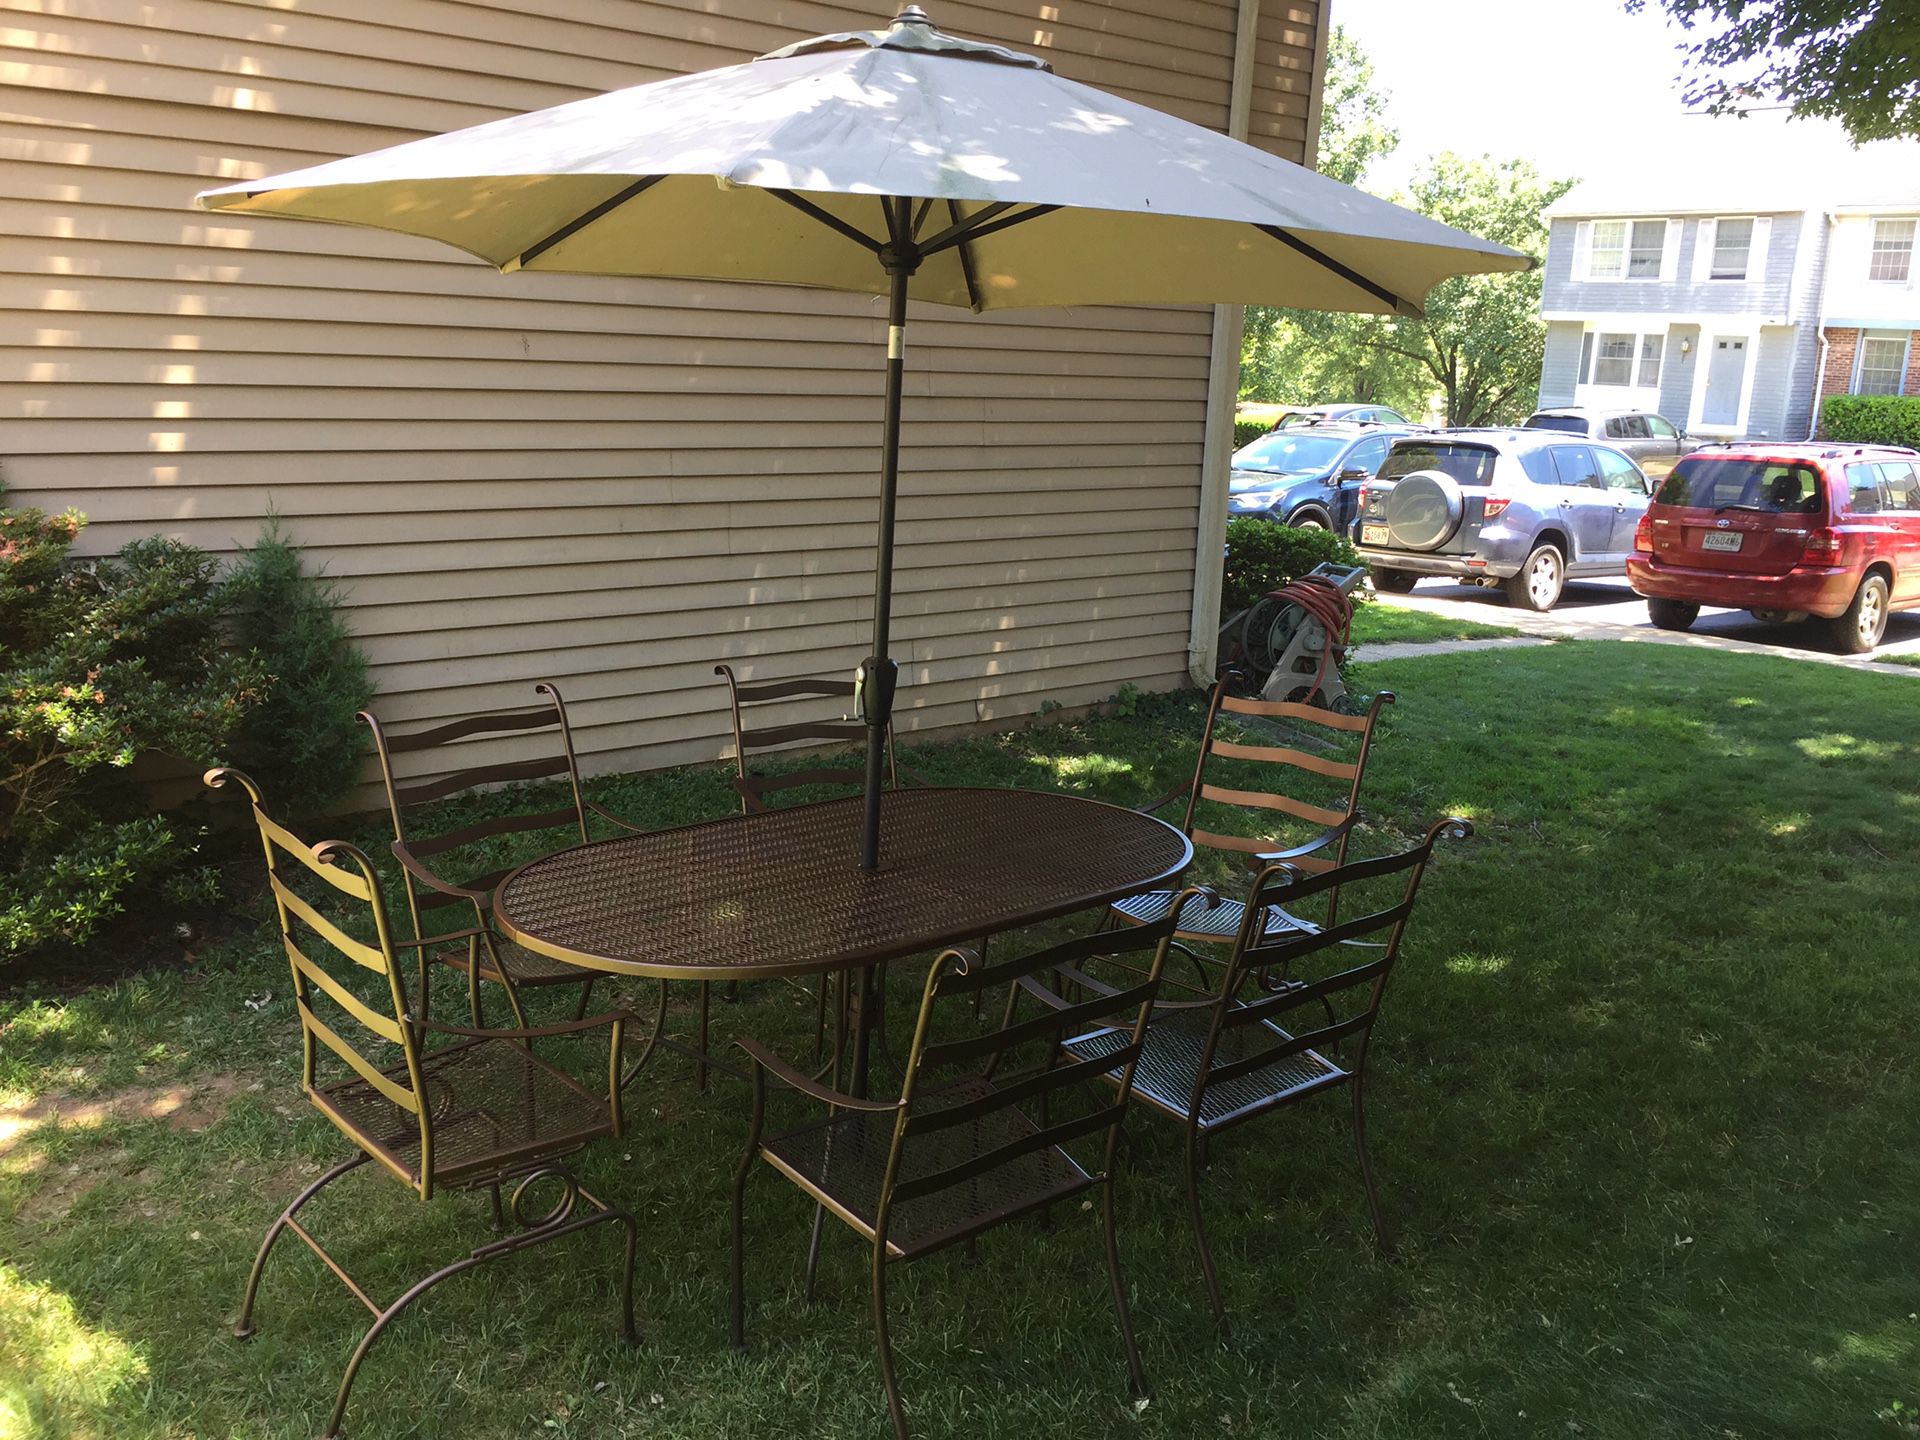 Large wrought iron patio set for sale in very good condition ready for your home party